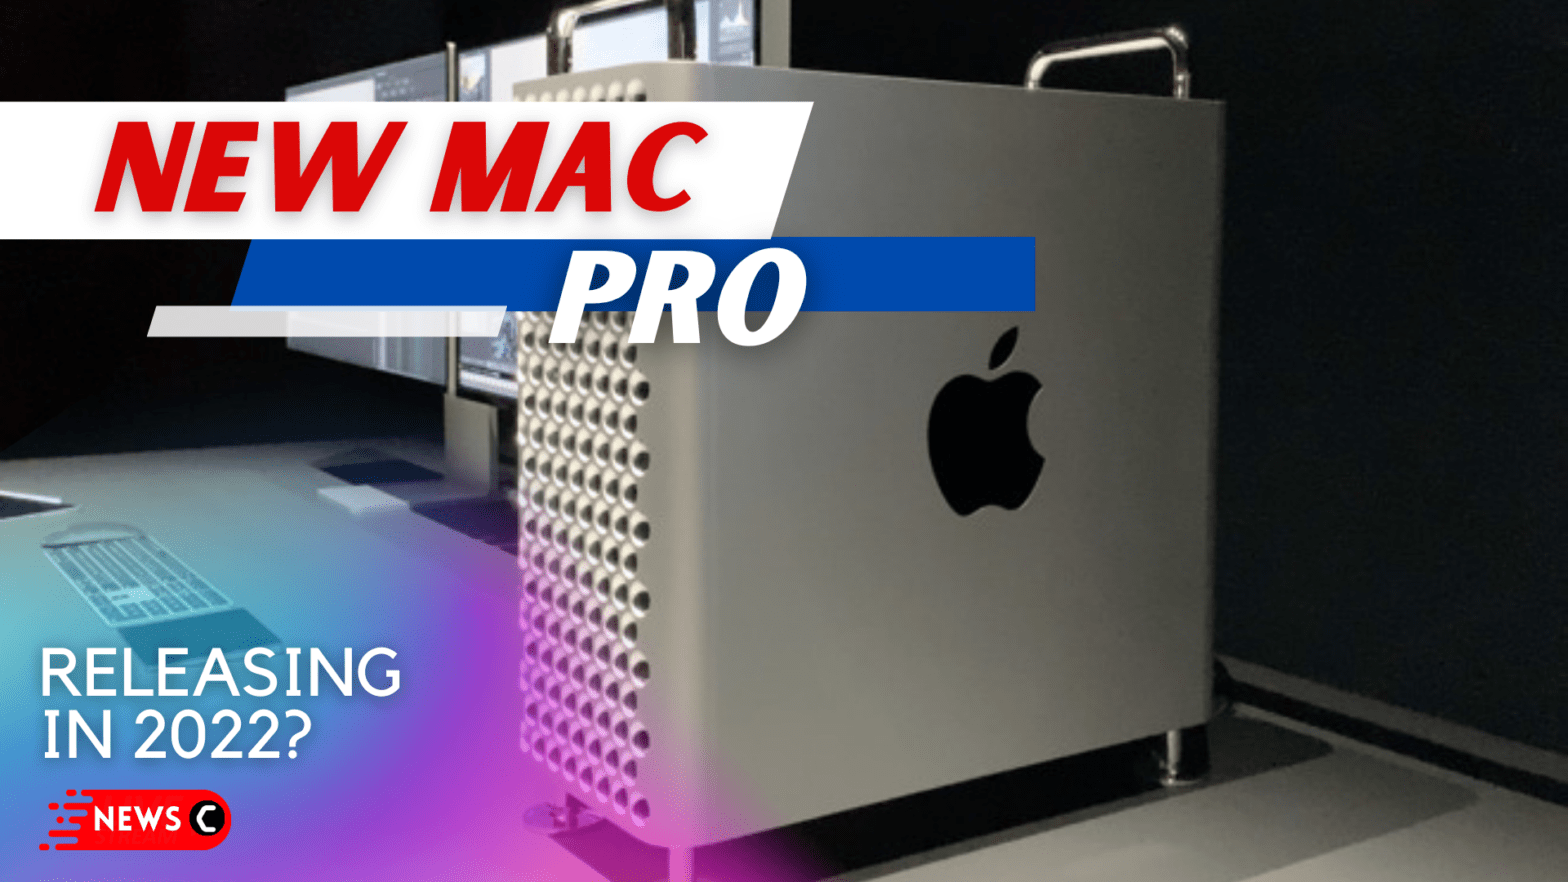 New Mac PRO Releasing Everything We Know So Far